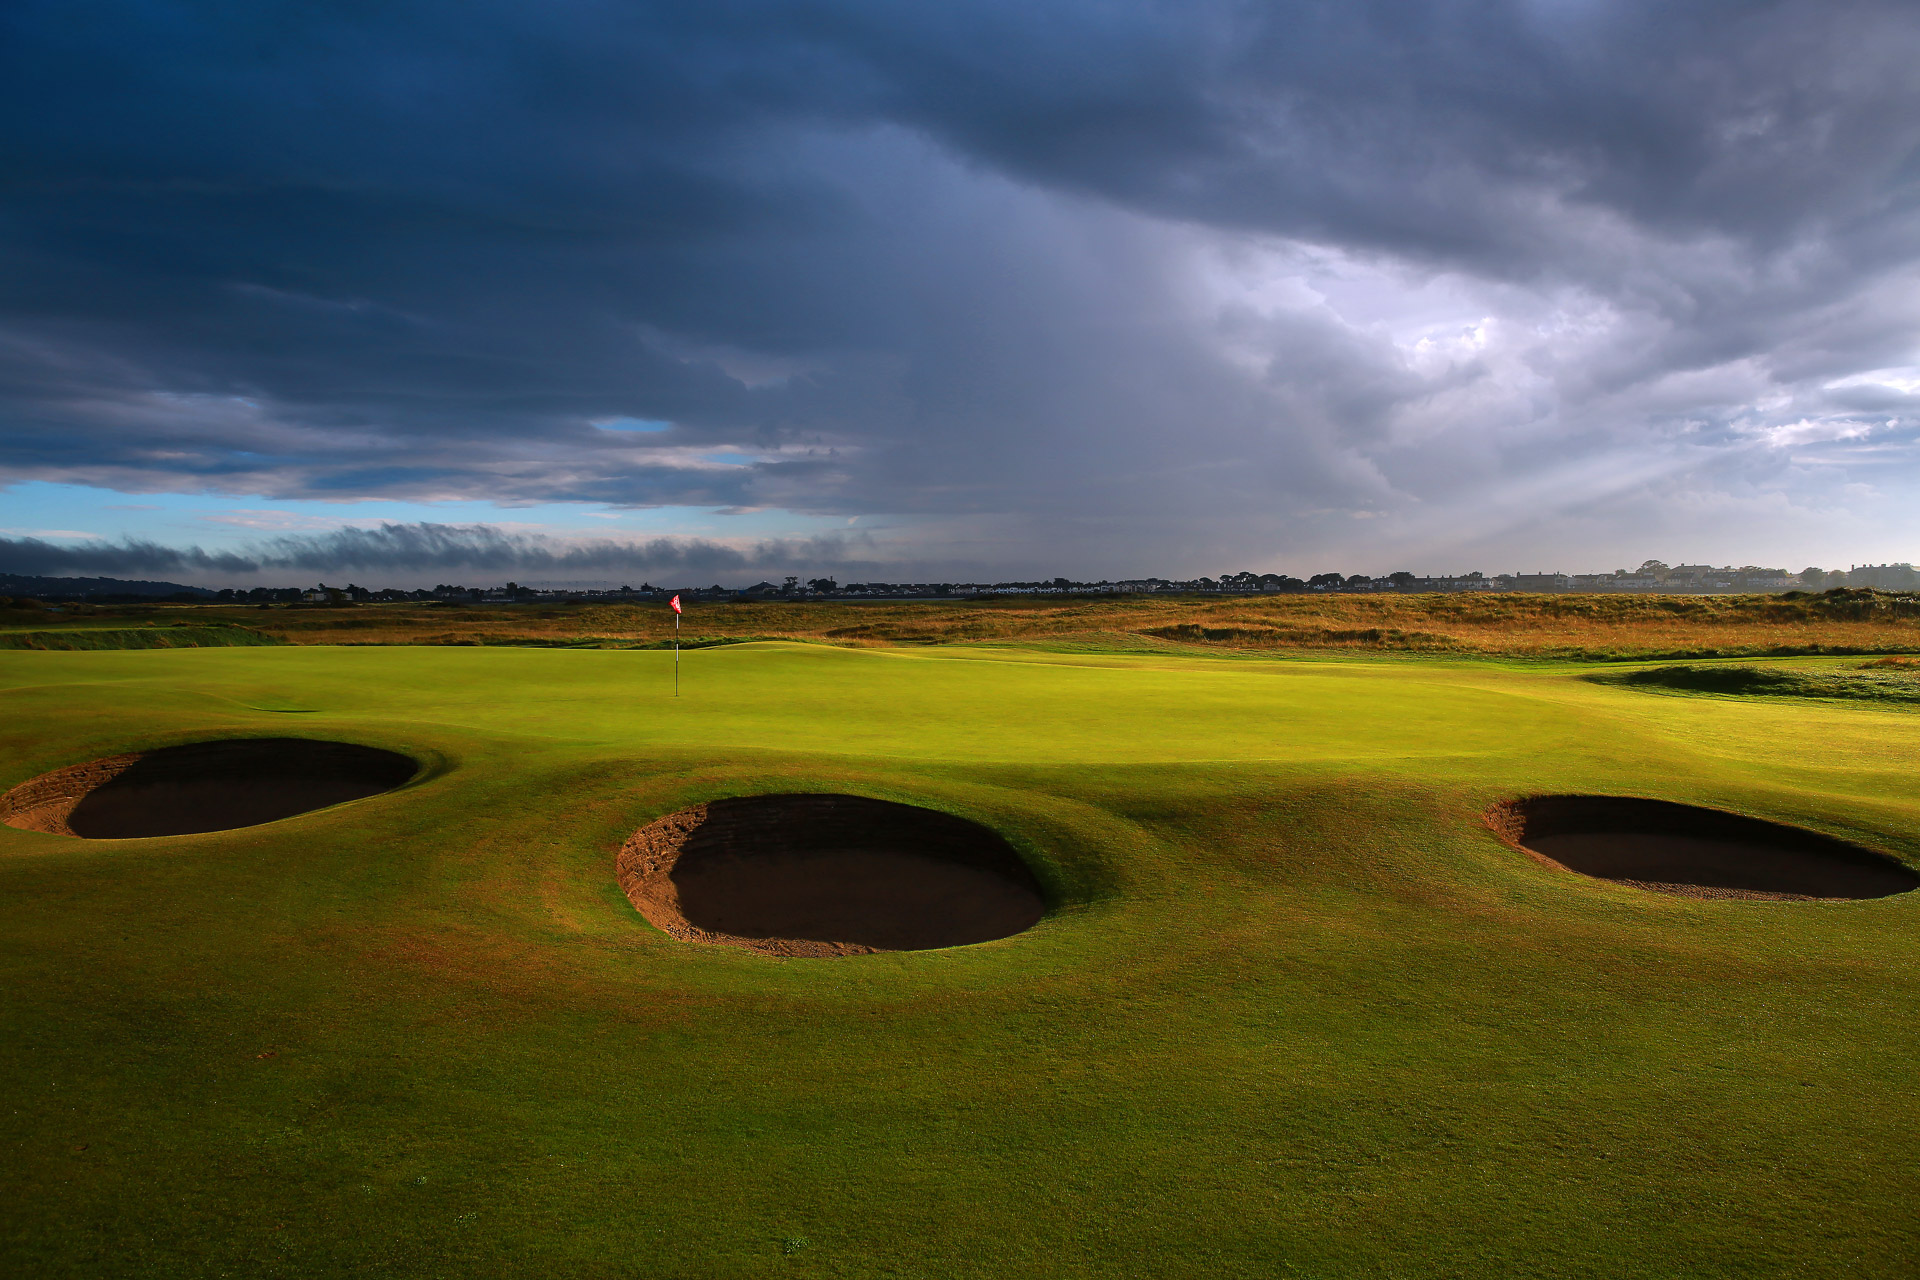 Portmarnock Golf Club is known as one of the world’s great links courses